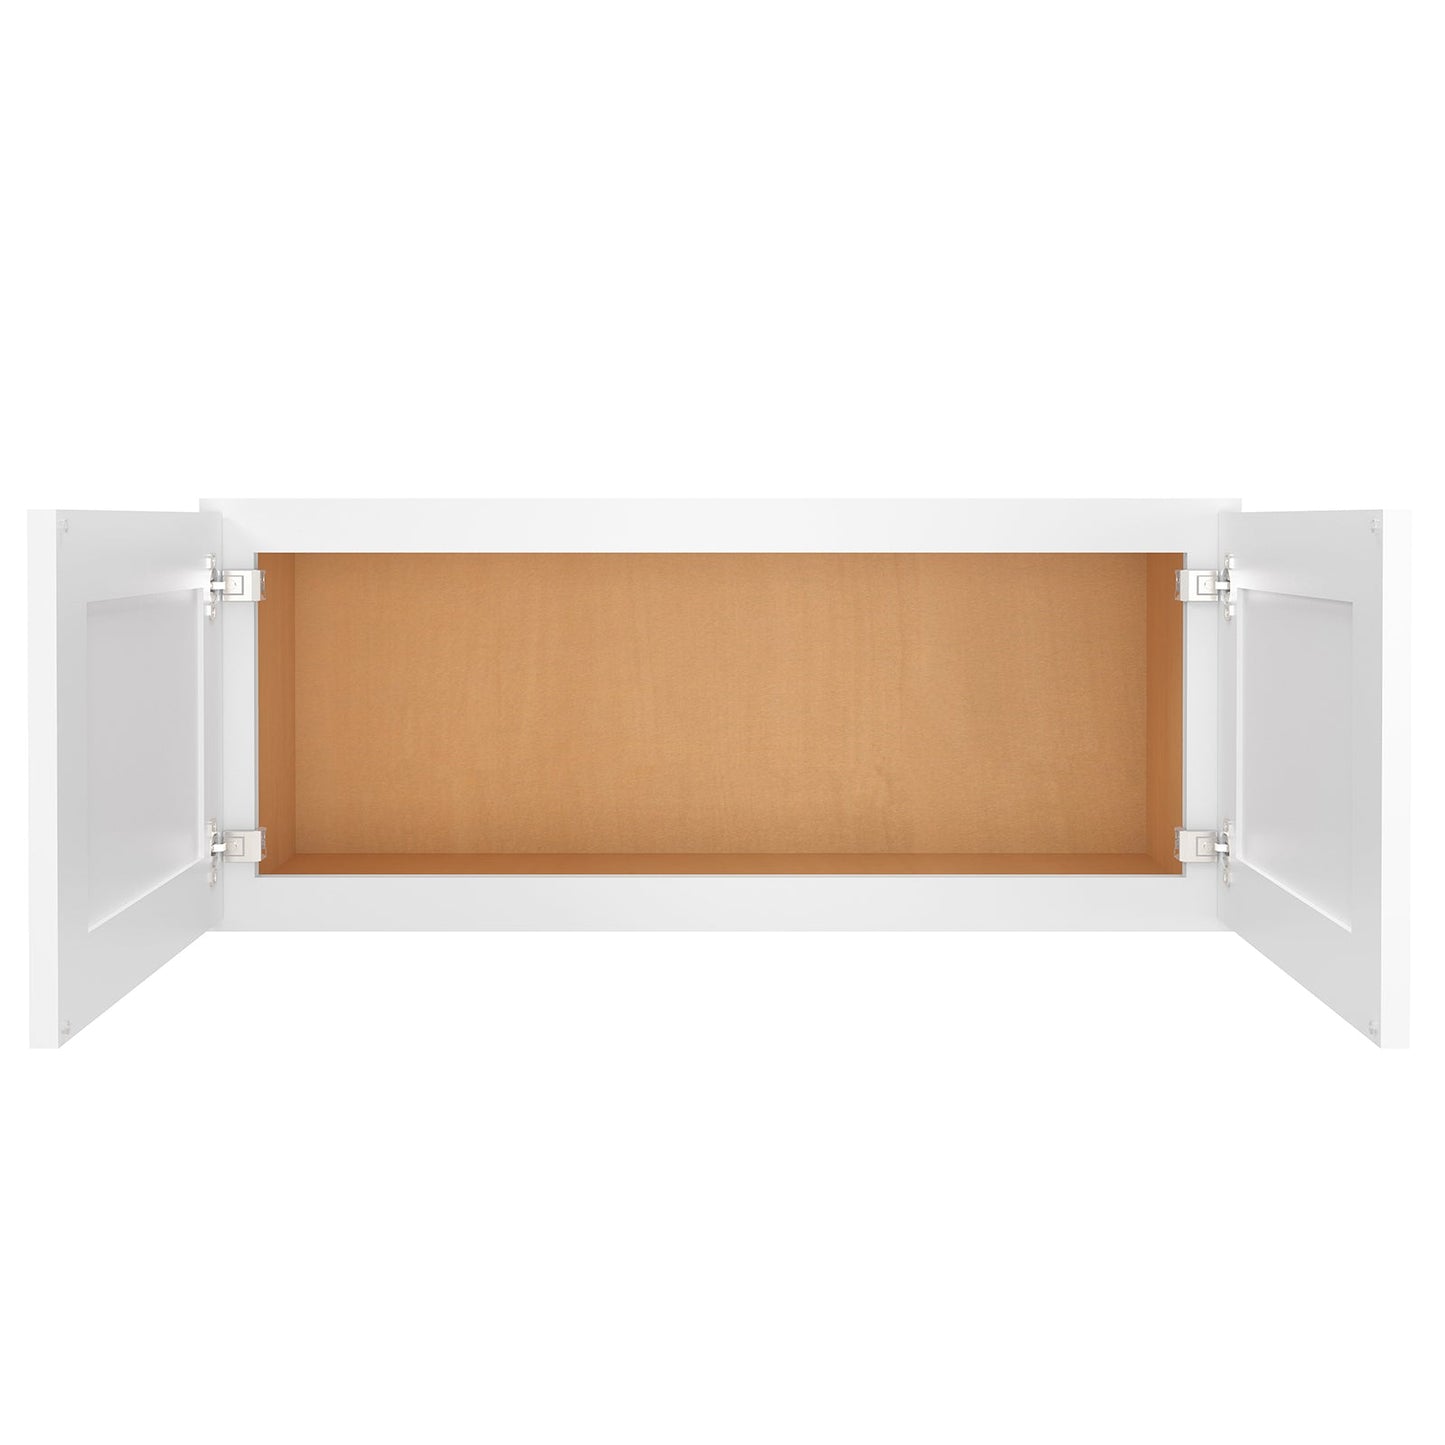 Medicine Cabinet Wall Mounted W3615